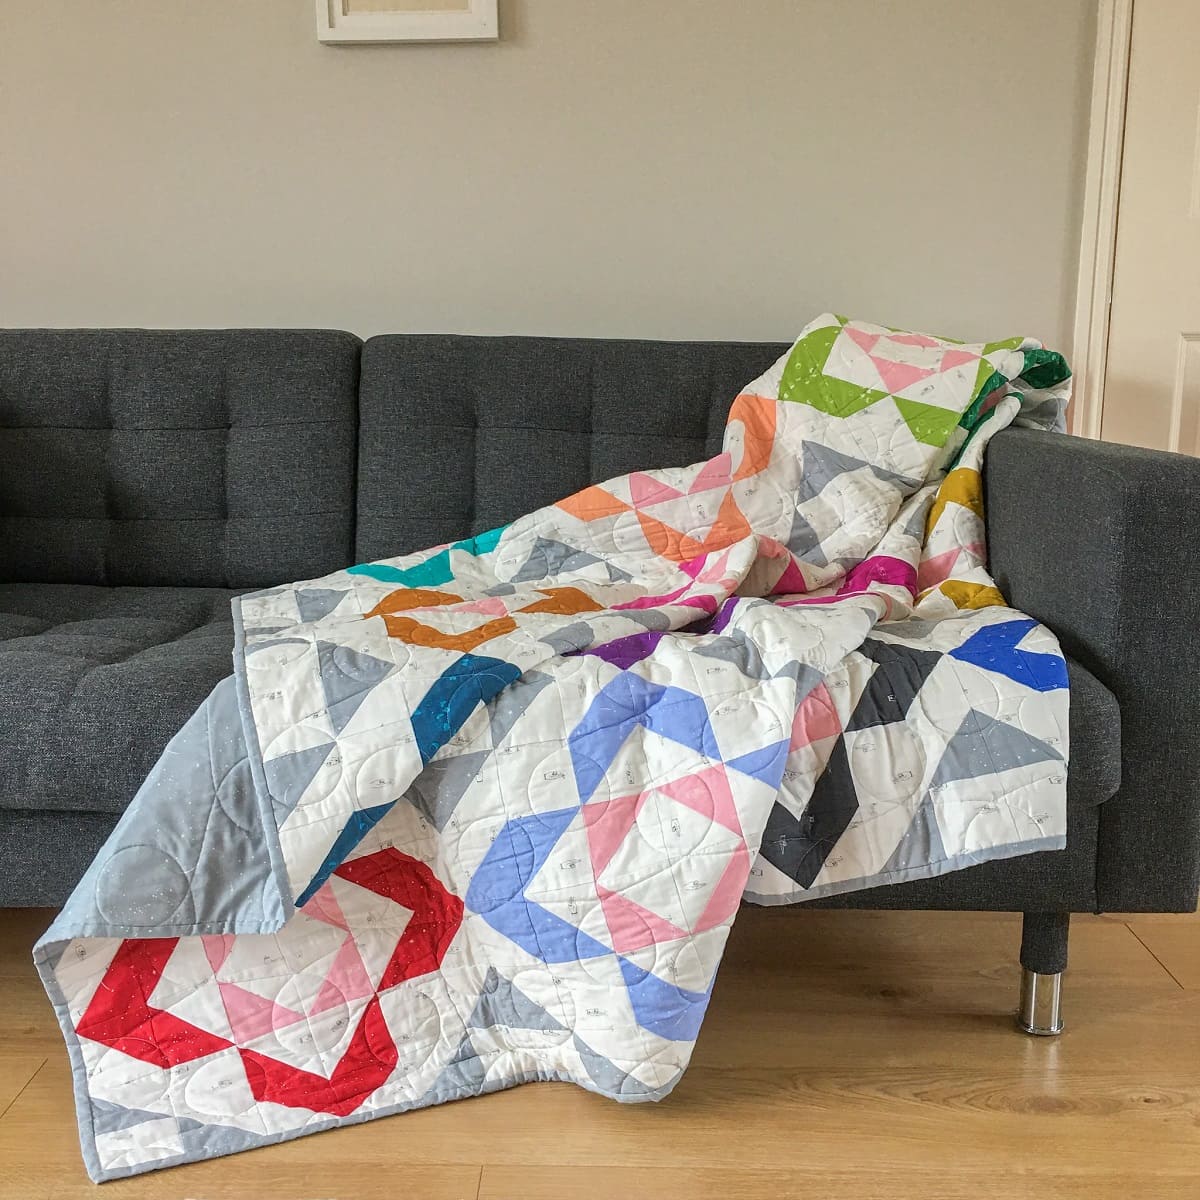 How To Make A Charmed Quilt